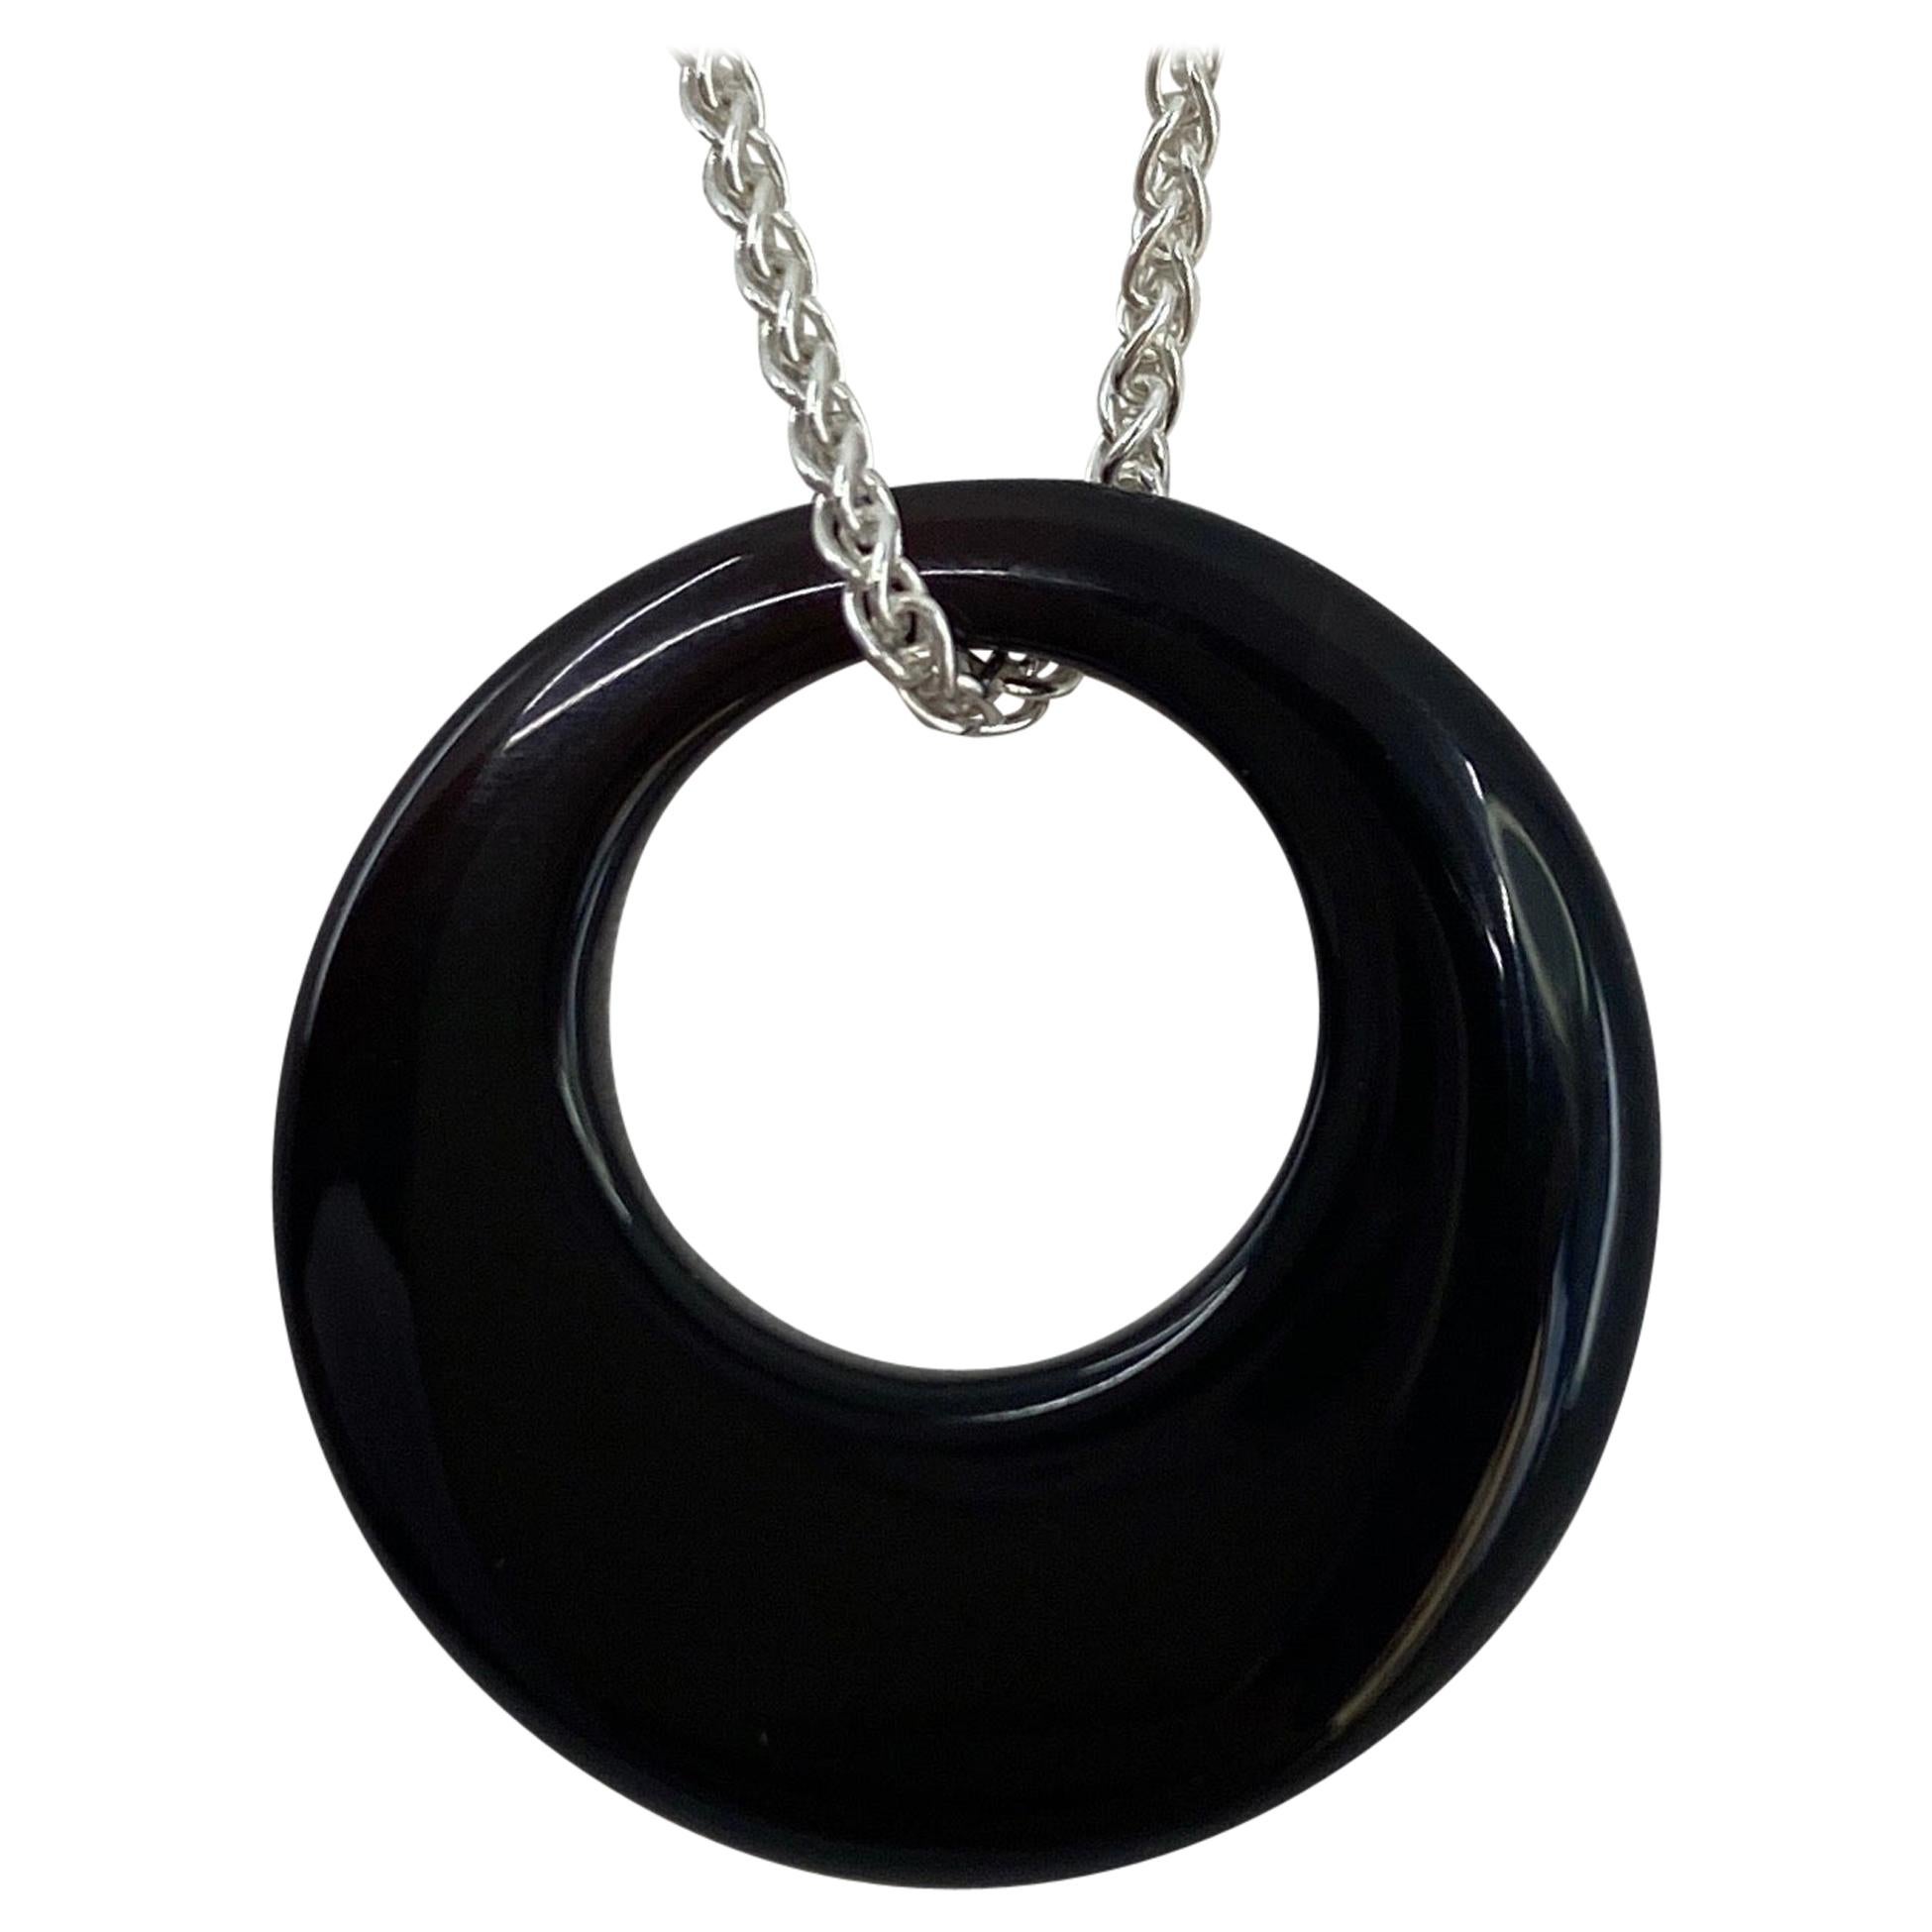 10.22ct Black Onyx Circle Sterling Silver Spiga Chain Pendant Necklace